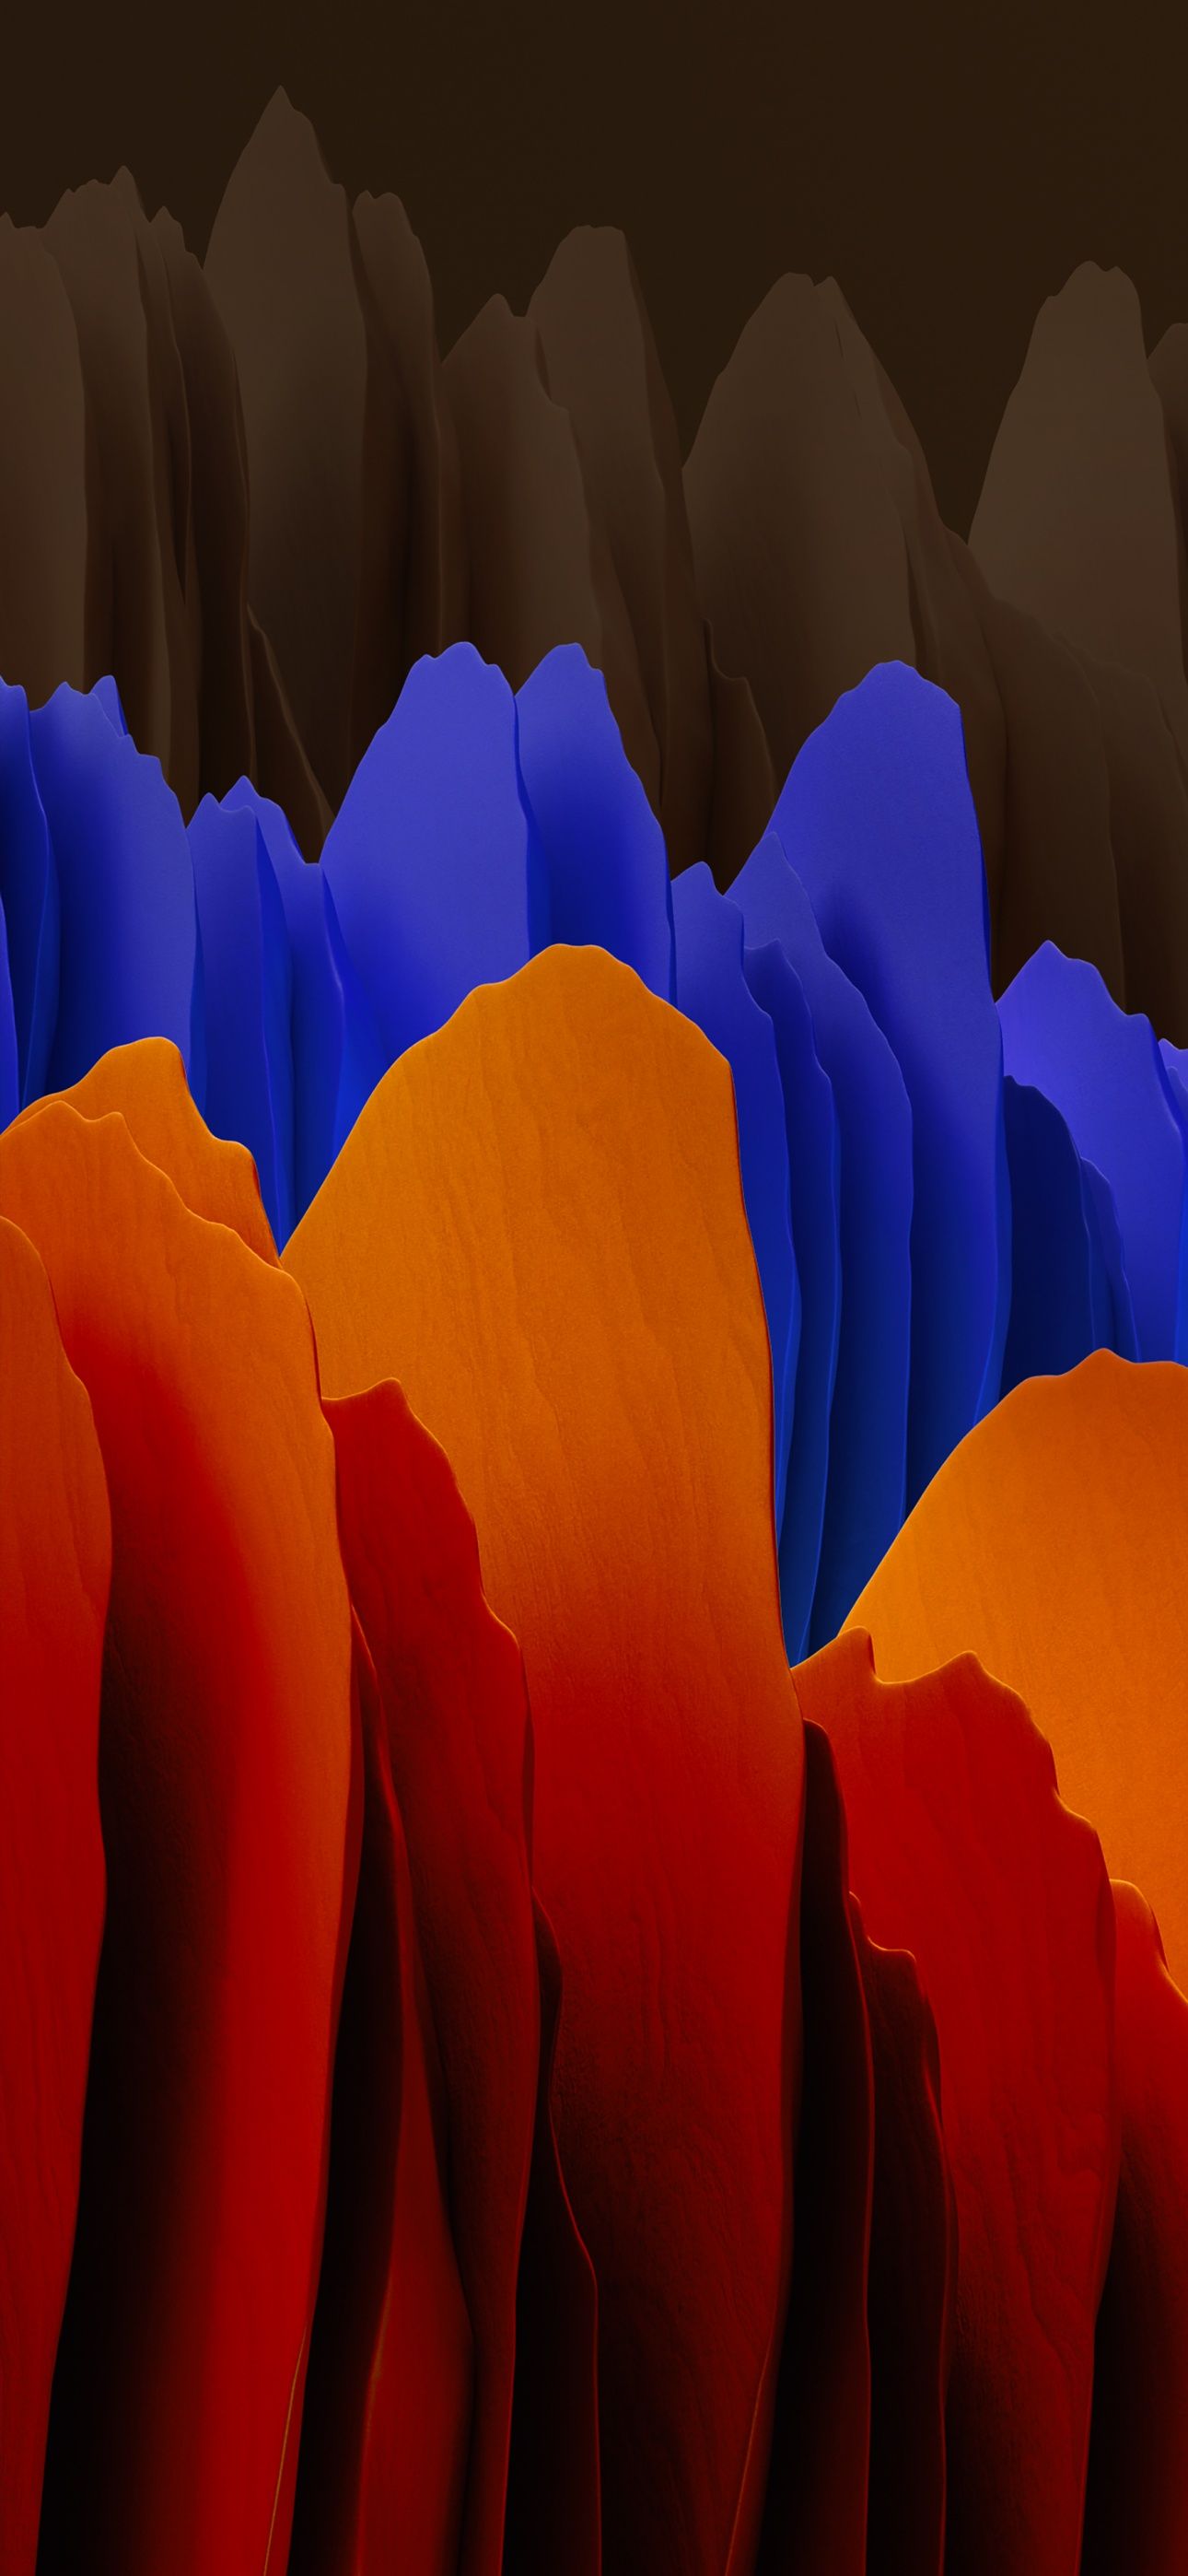 A 3D render of a wave-like formation of different colored layers - Orange